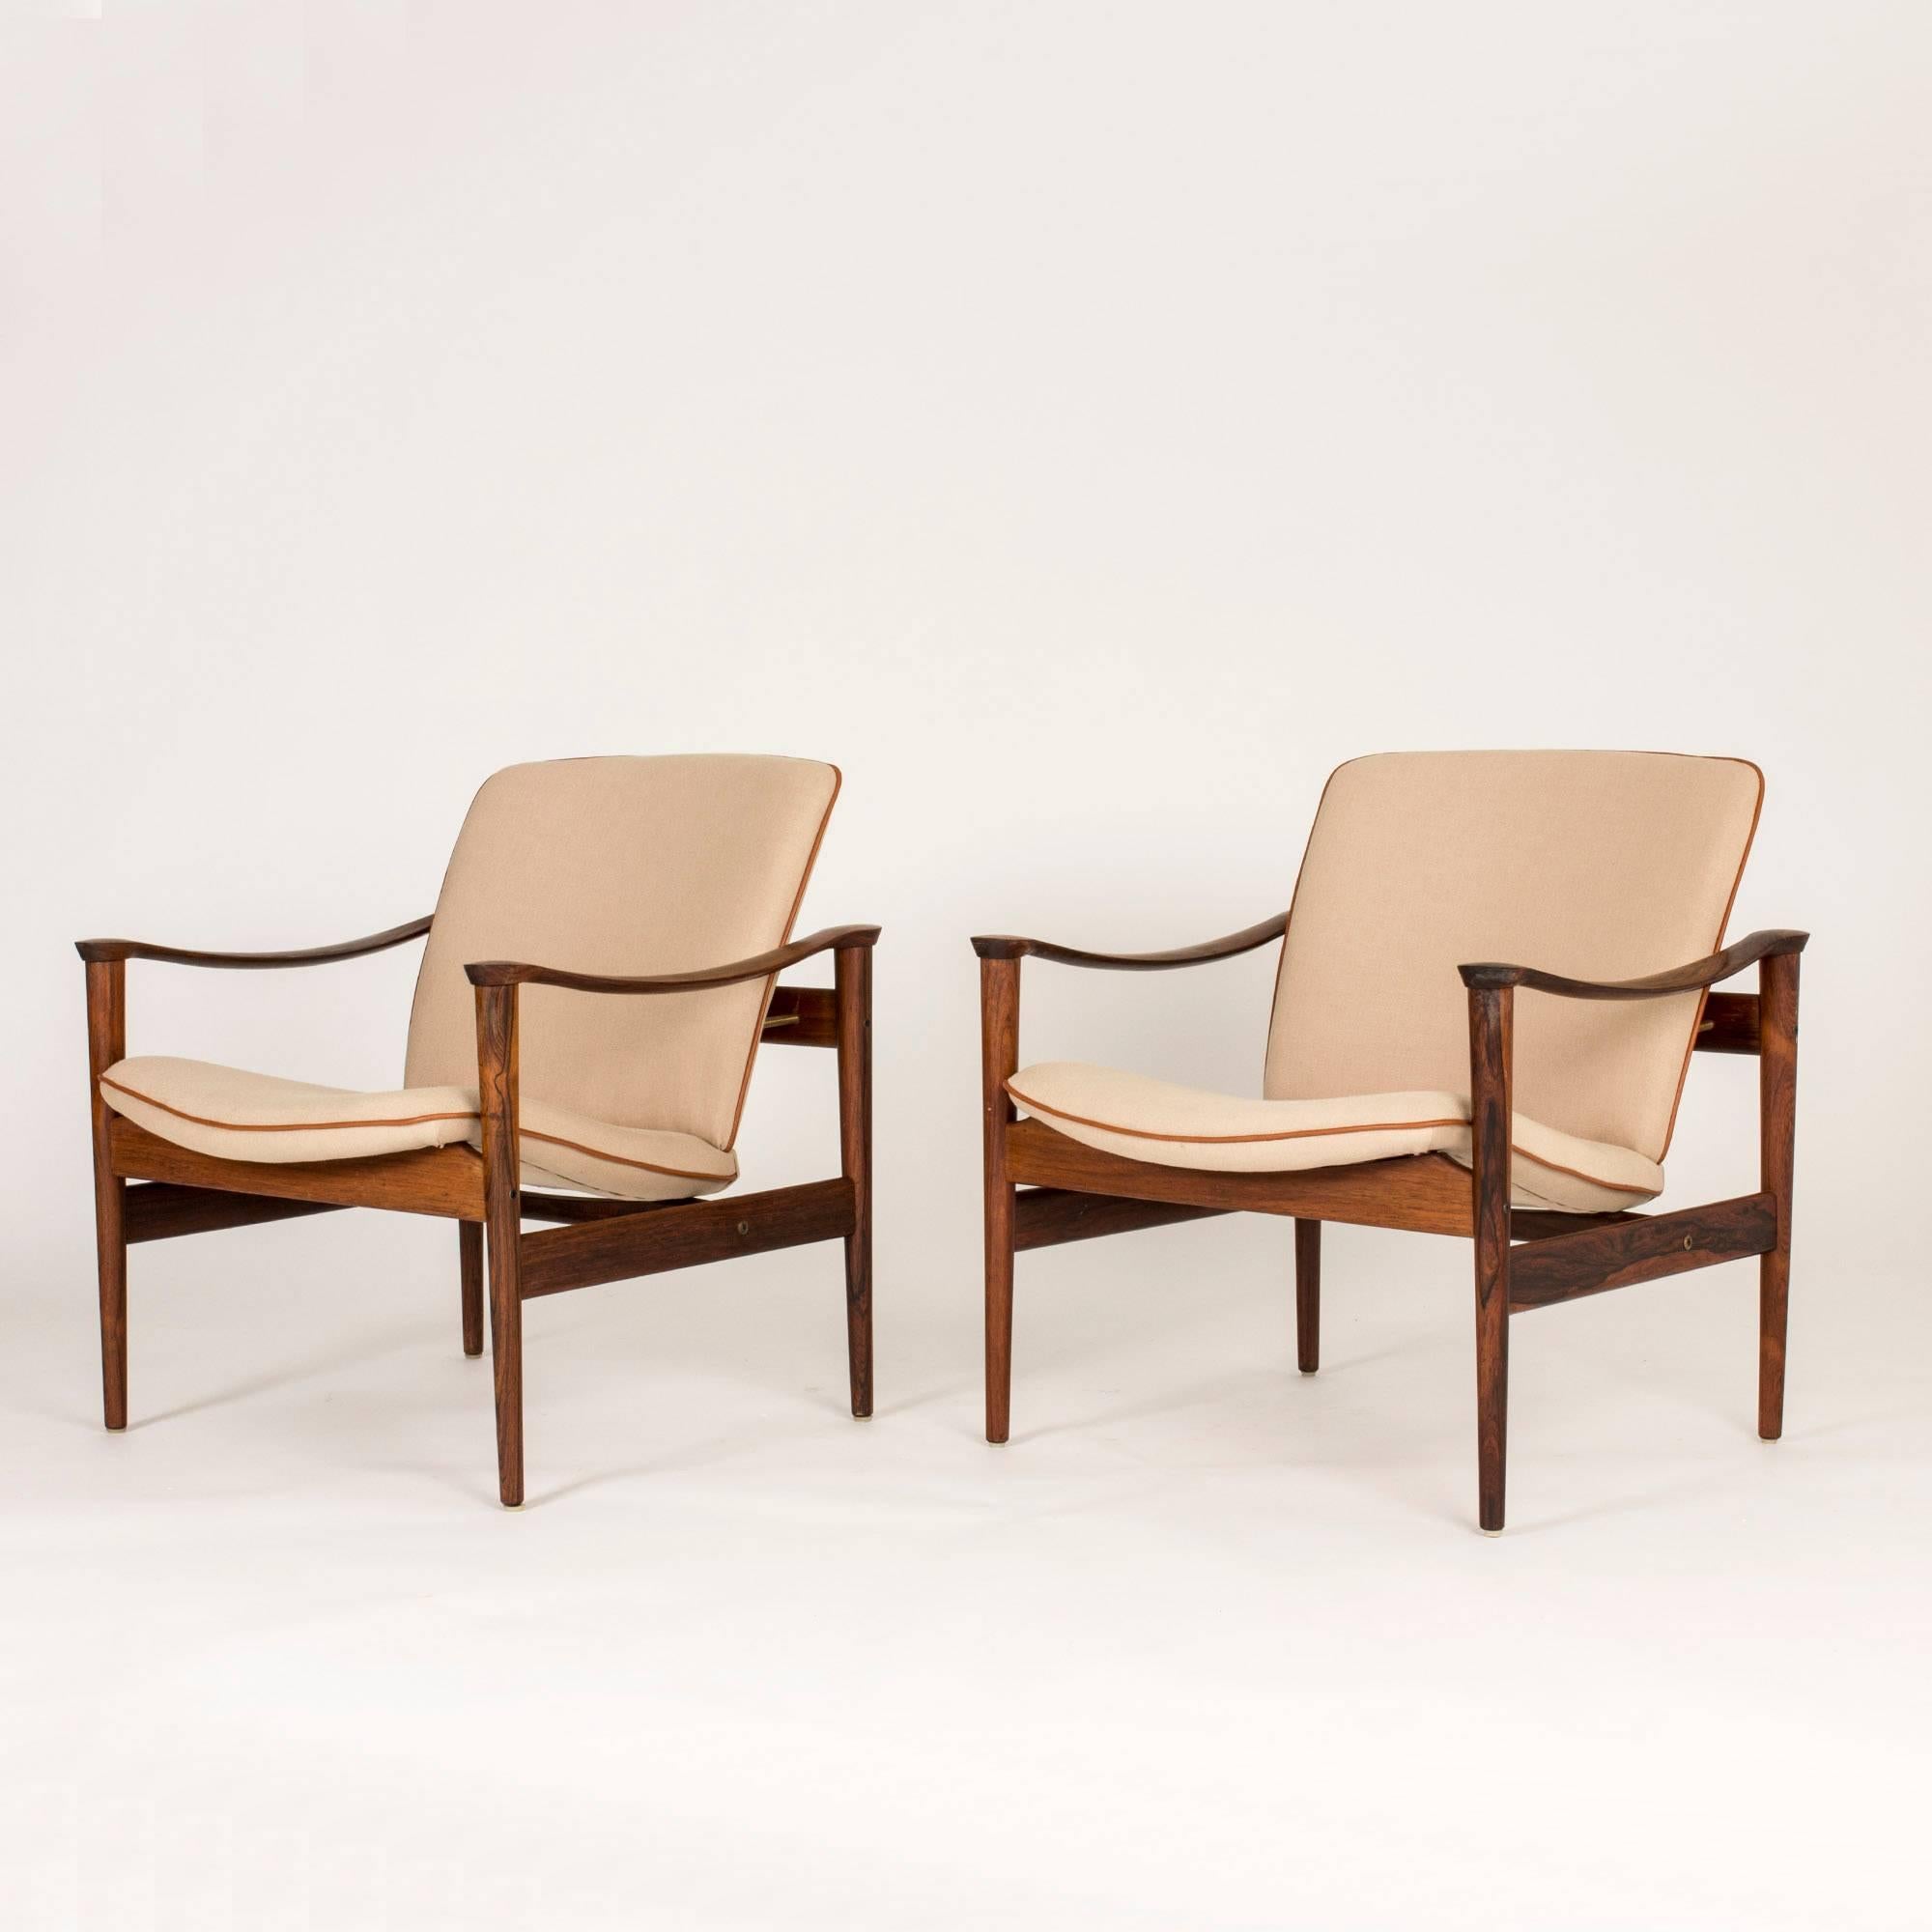 Pair of lounge chairs by Fredrik Kayser with beautiful sculpted armrests. Upholstered with off-white wool fabric with brown leather piping along the edges. Measure: Seat height 42 cm.